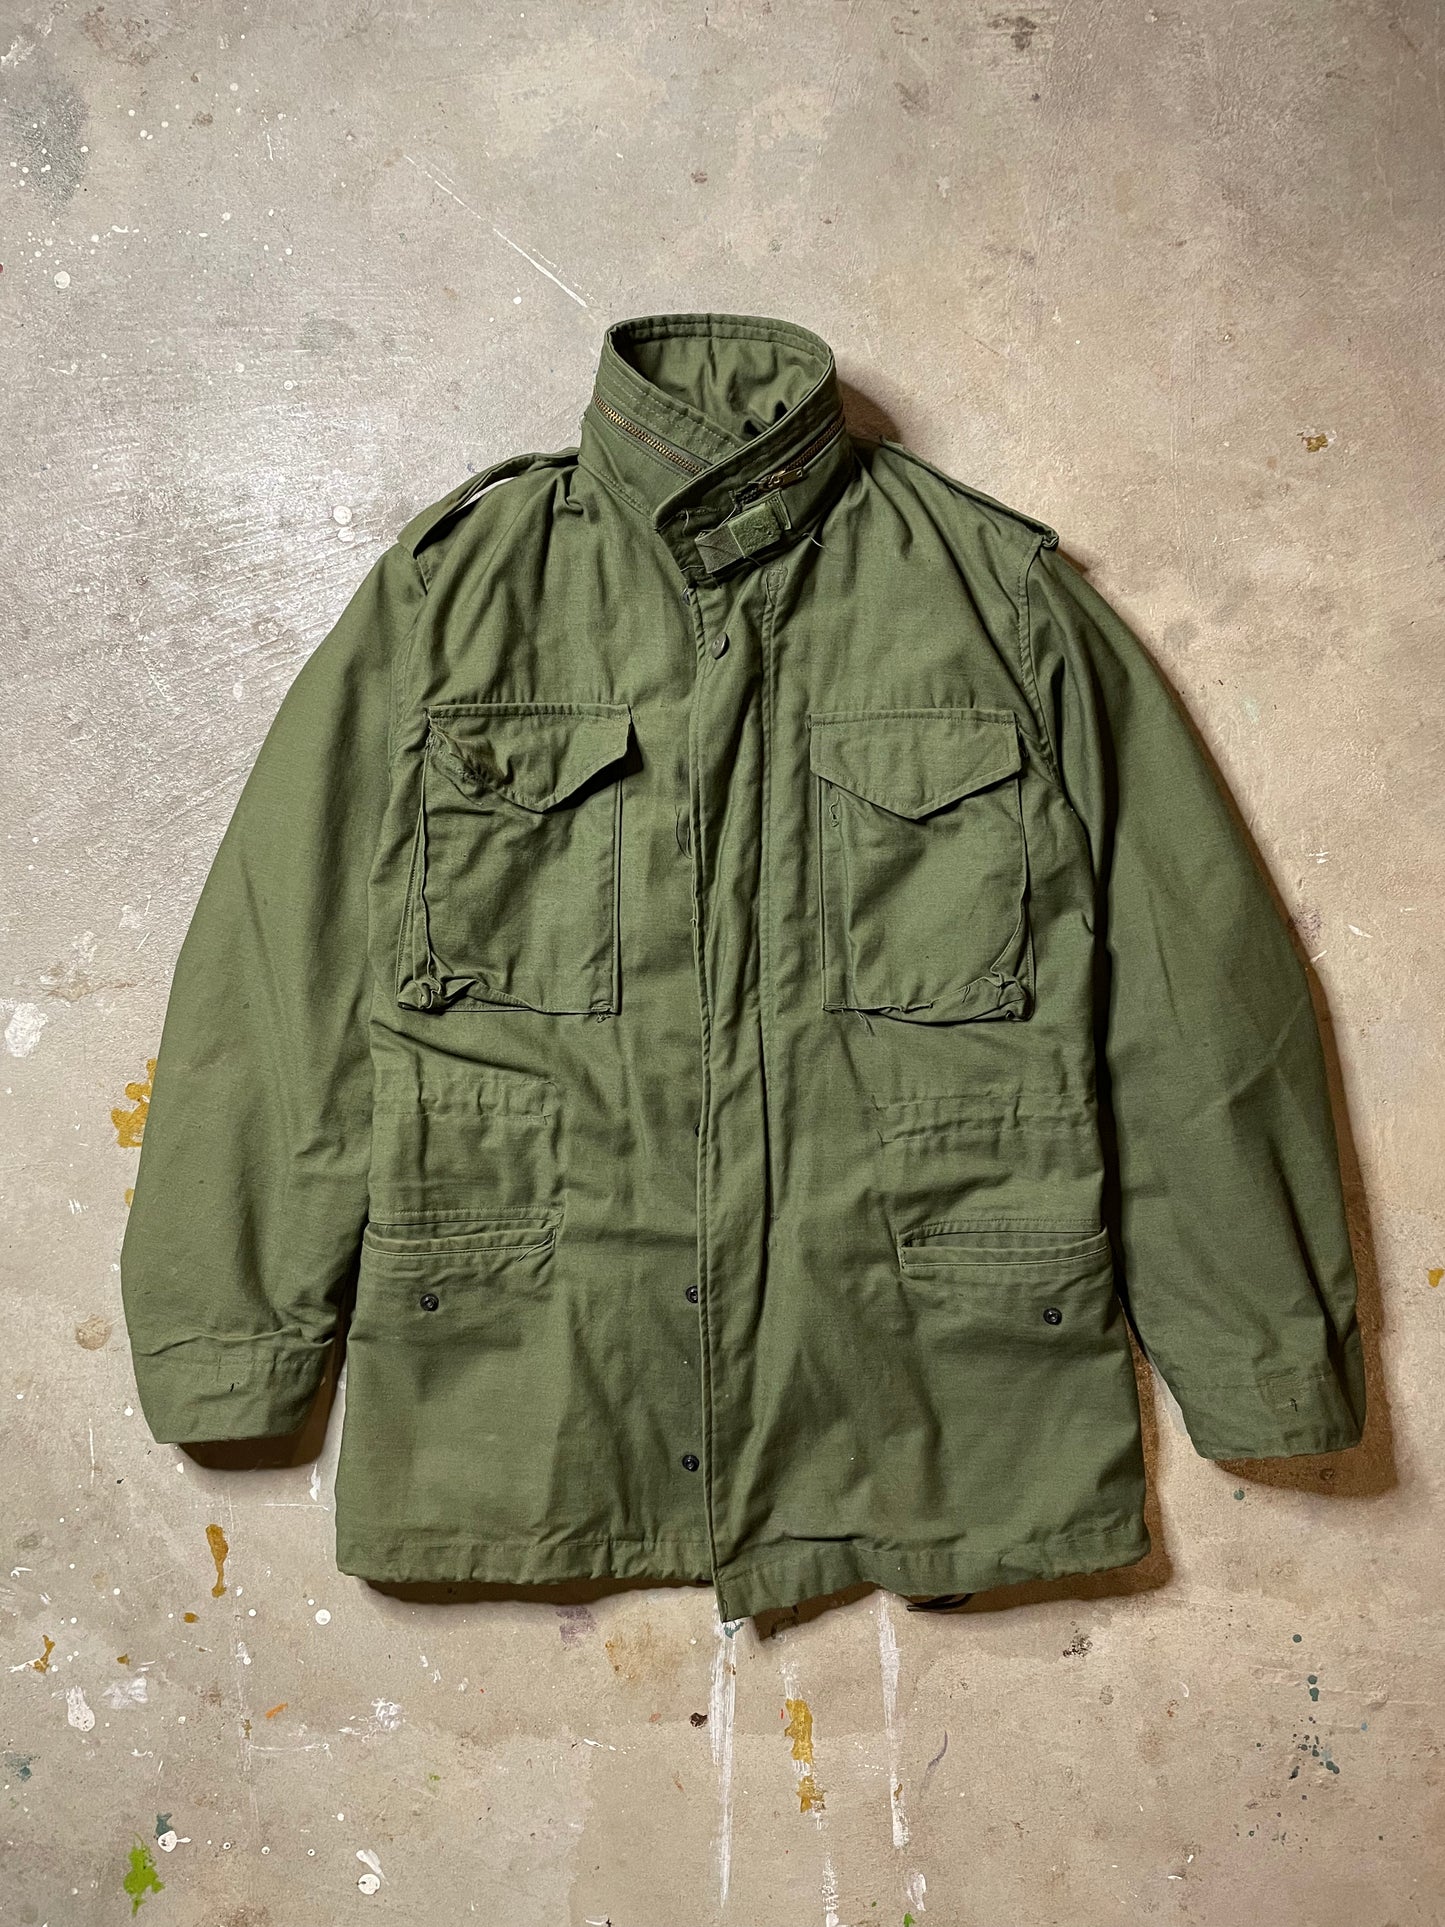 Vintage Lined Army Jacket